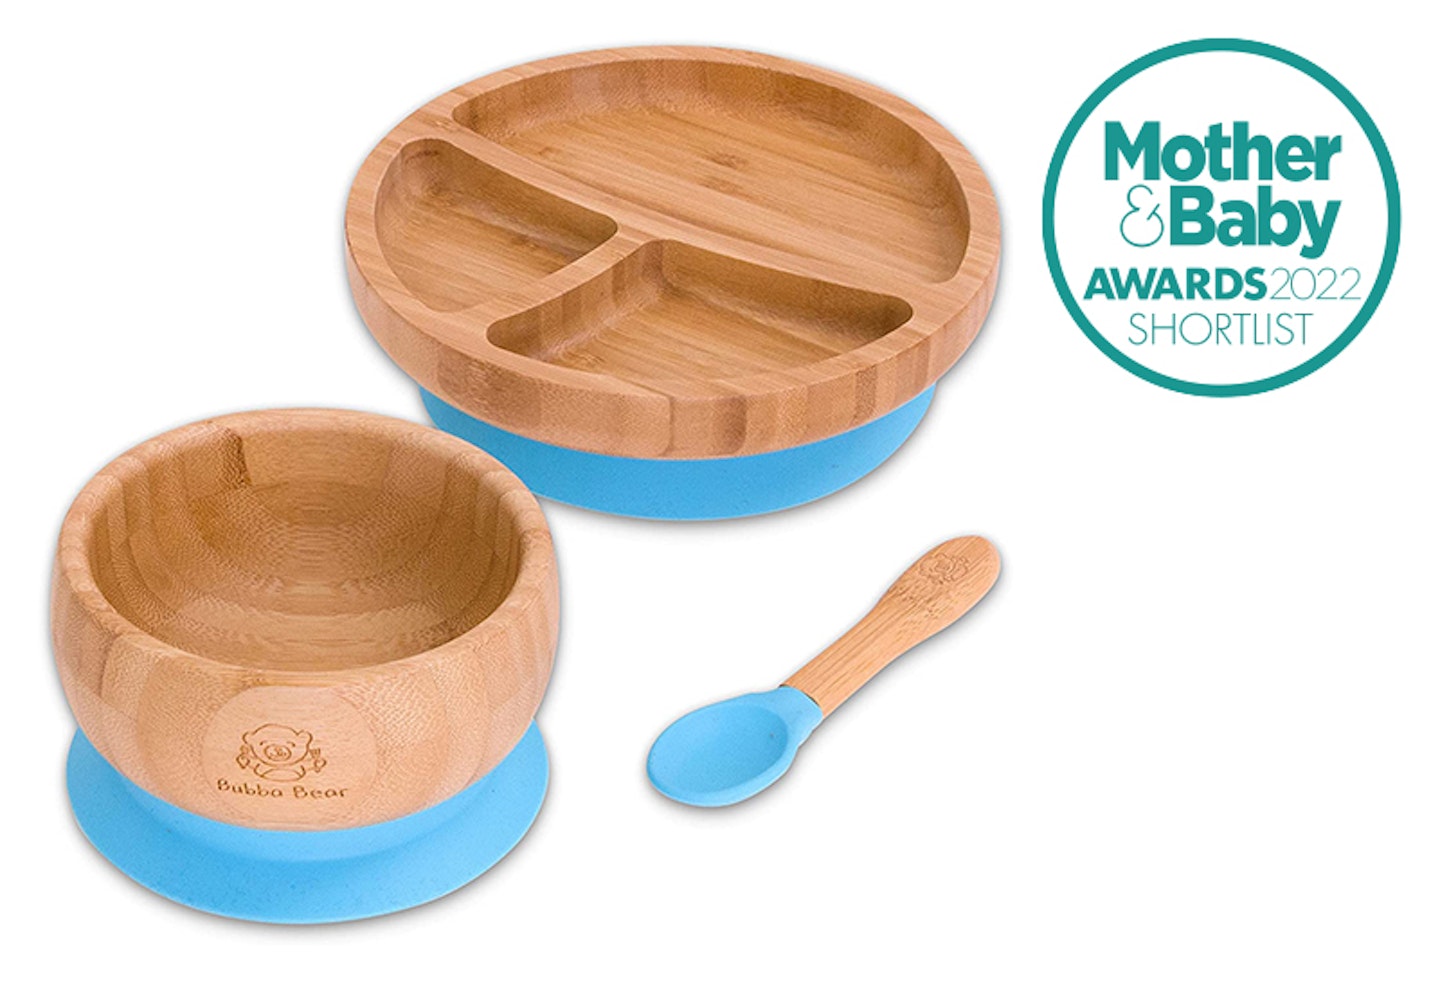 Baby-Led Weaning With the Best Baby Bowls and Spoons